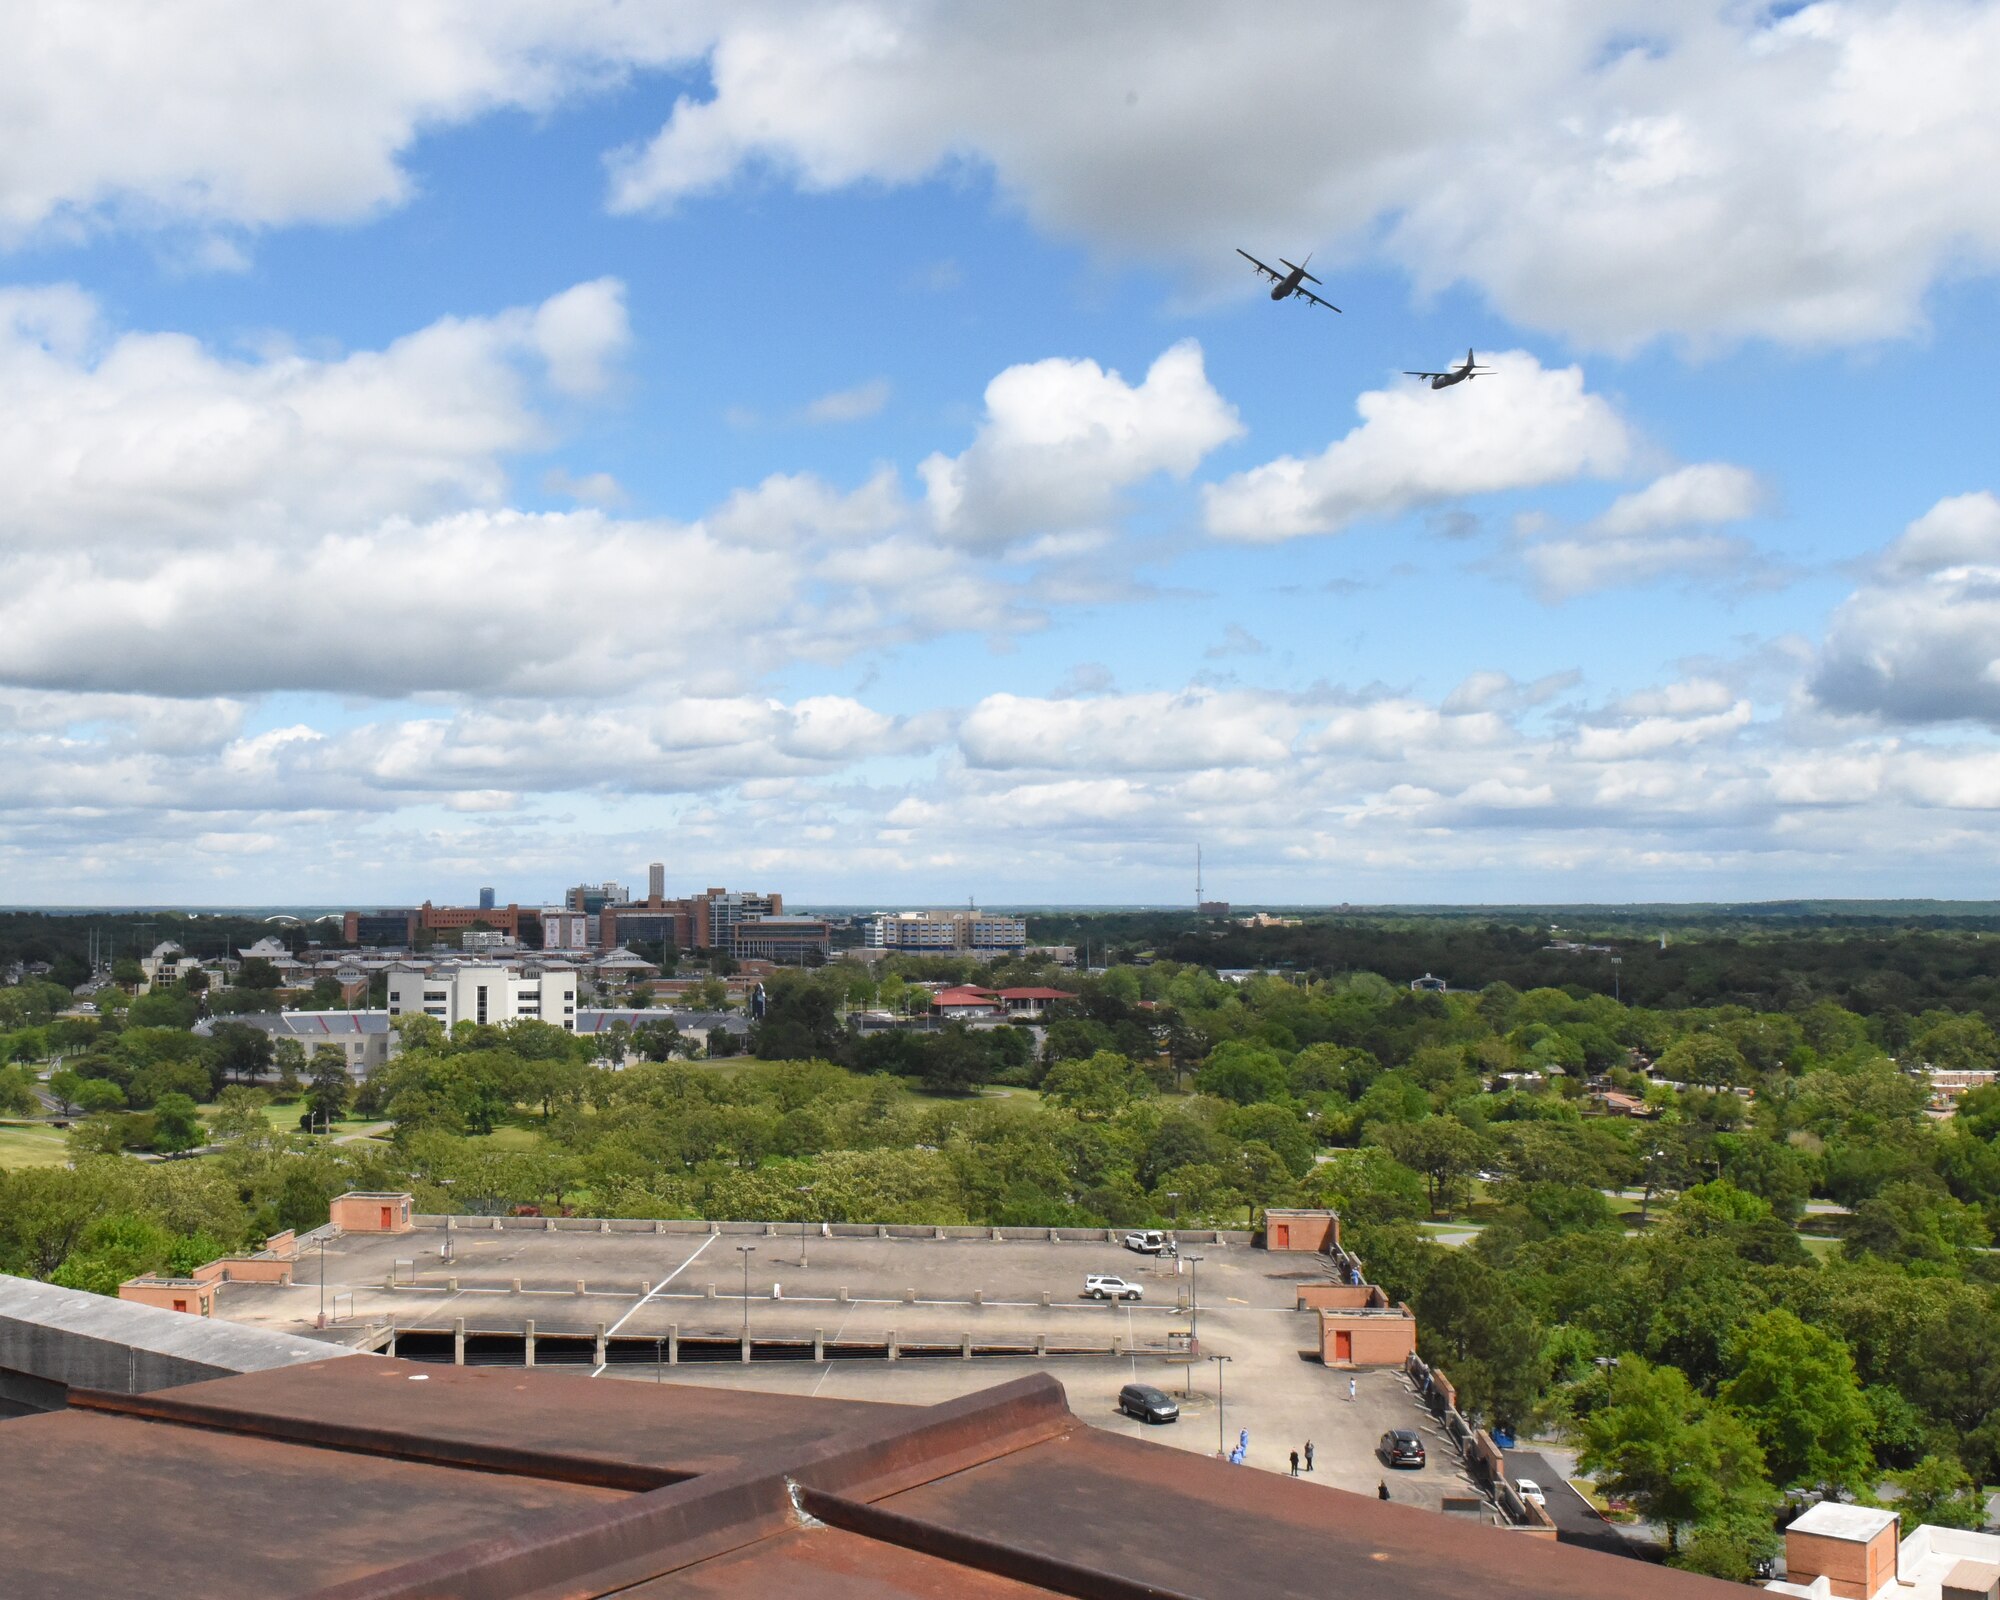 Two C-130s fly over the city